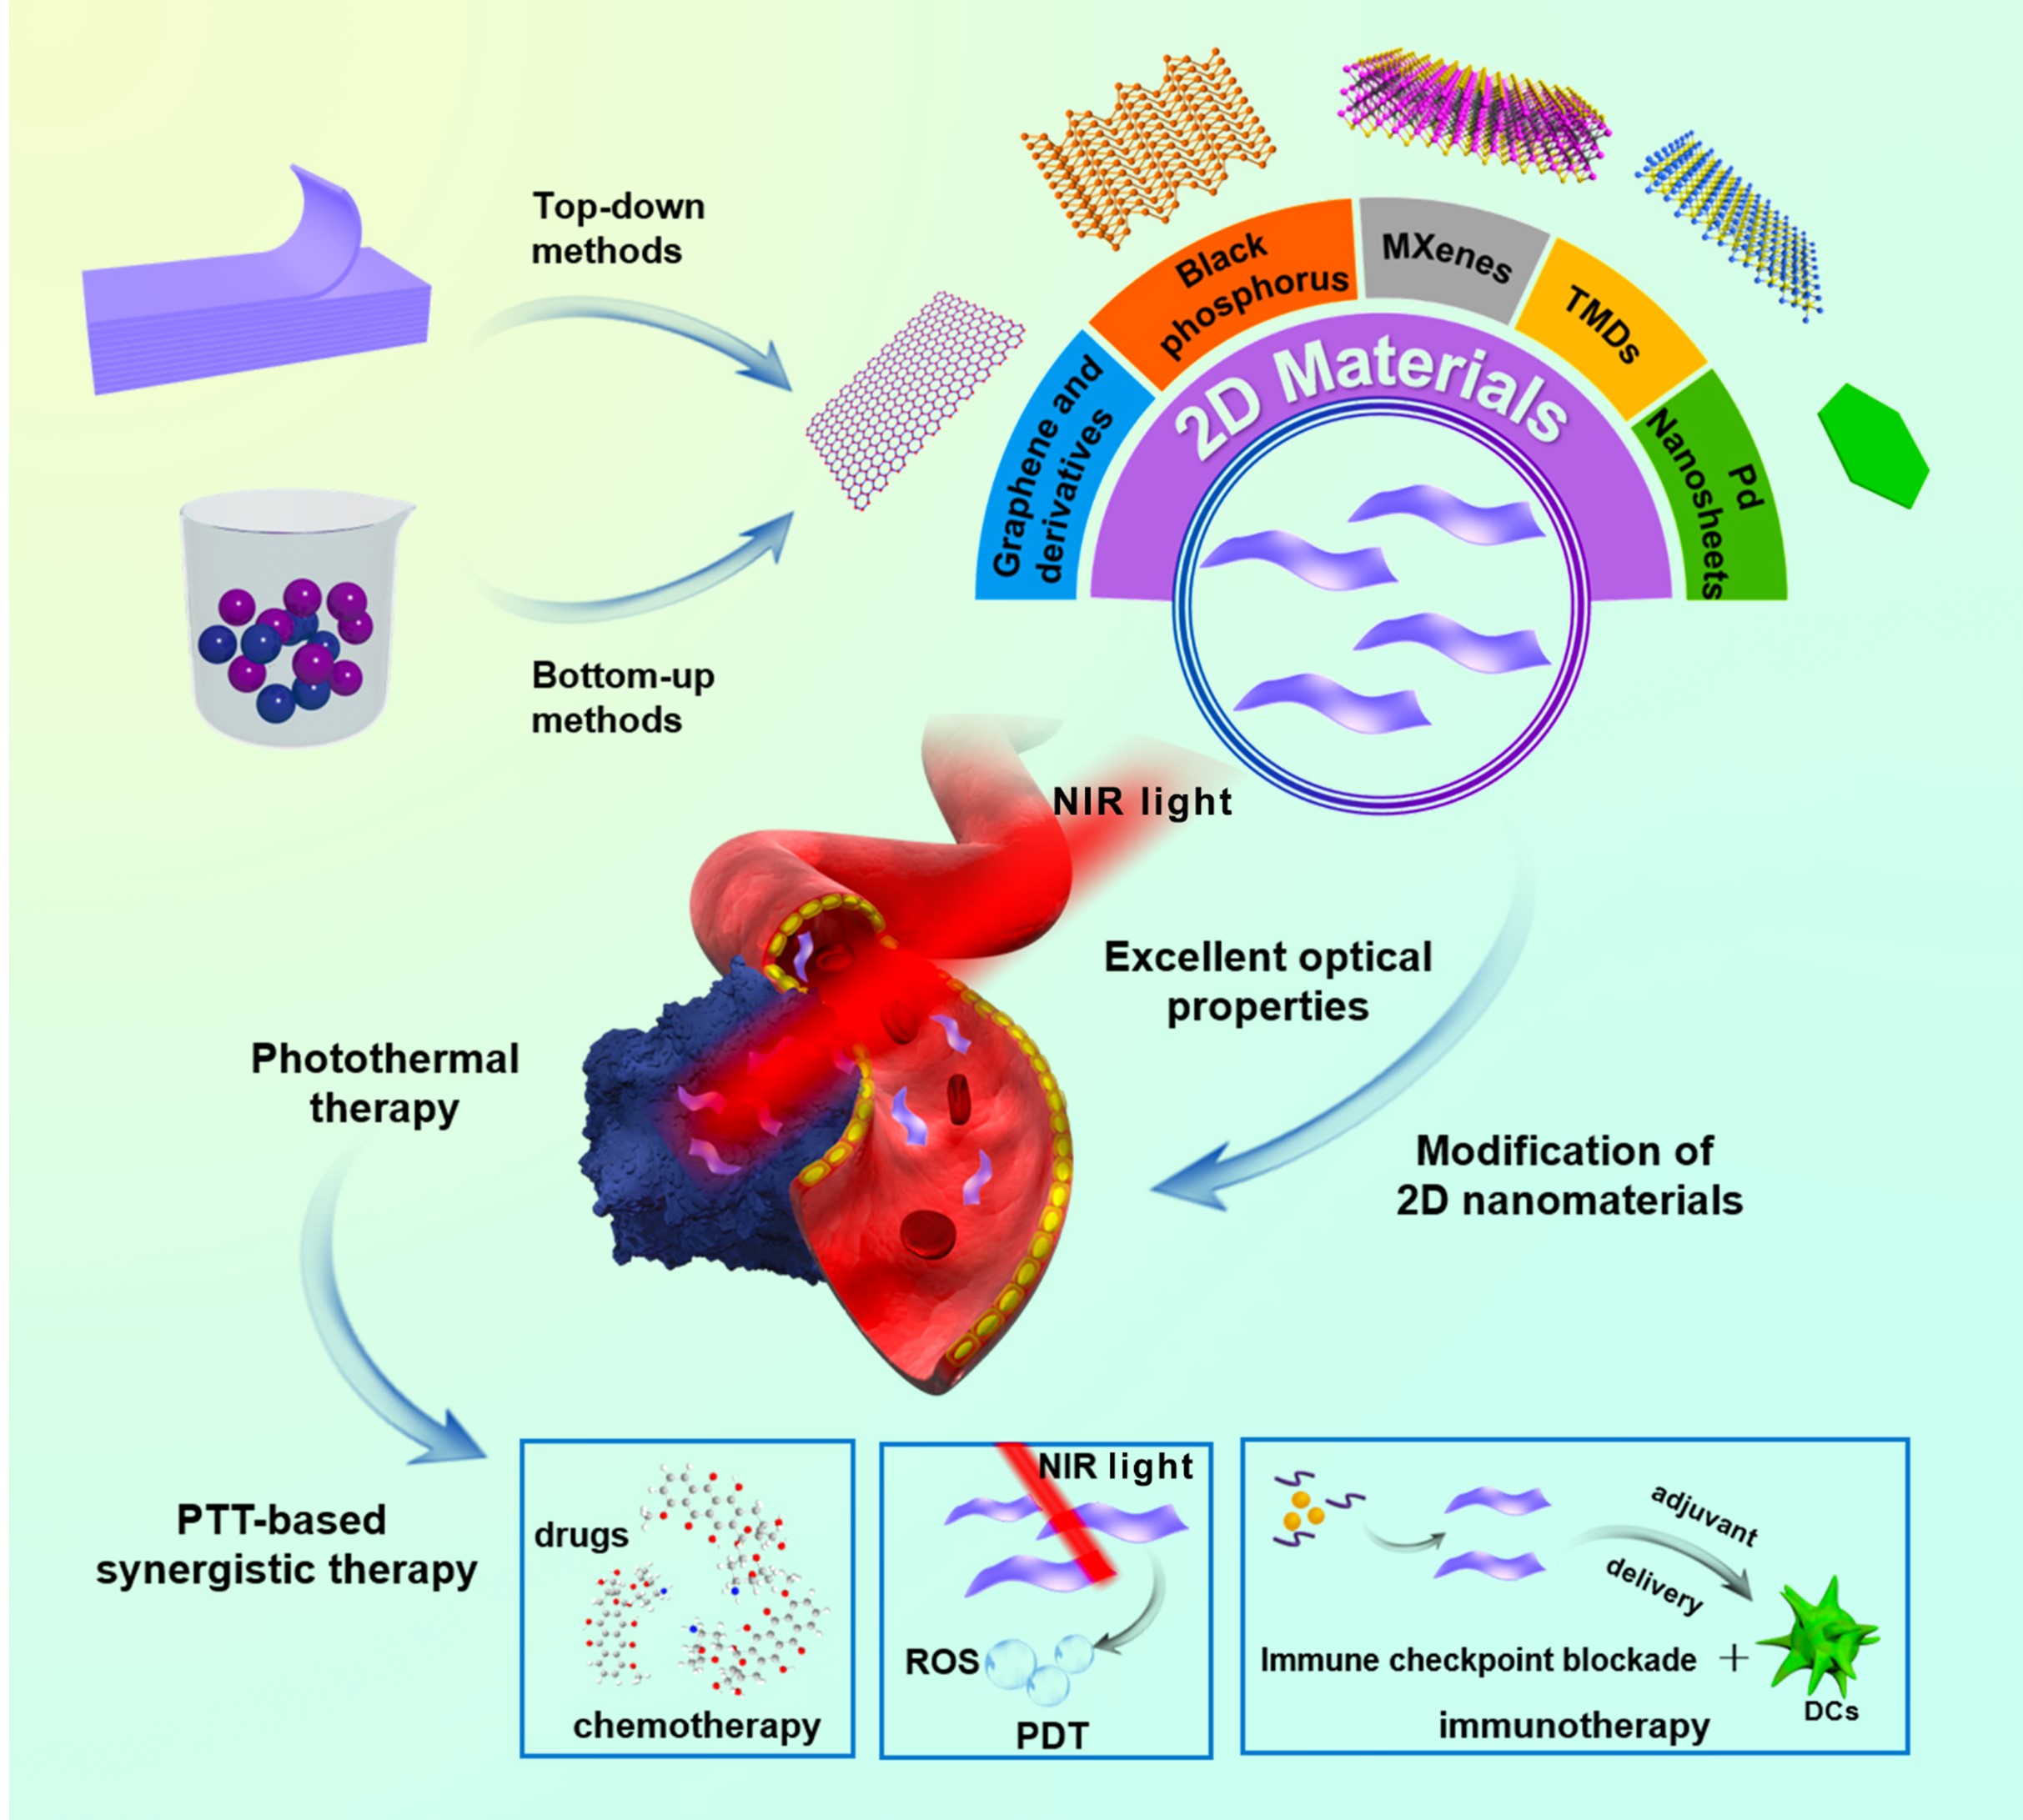 Twodimensional nanomaterials for photothermal therapy reported by Prof